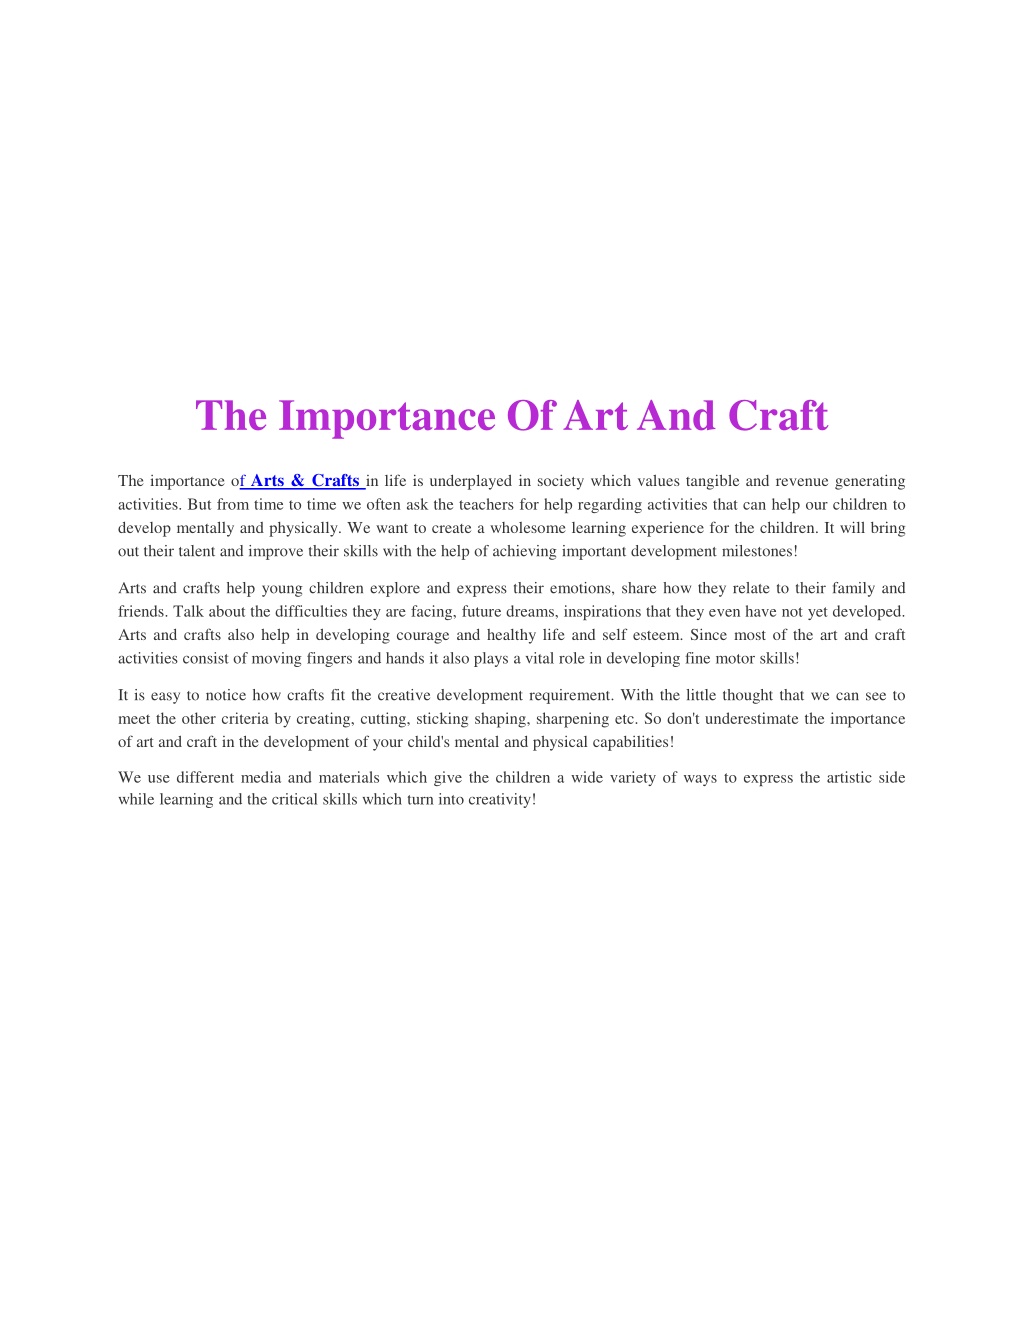 PPT - Arts & Crafts PowerPoint Presentation, free download - ID:10712060